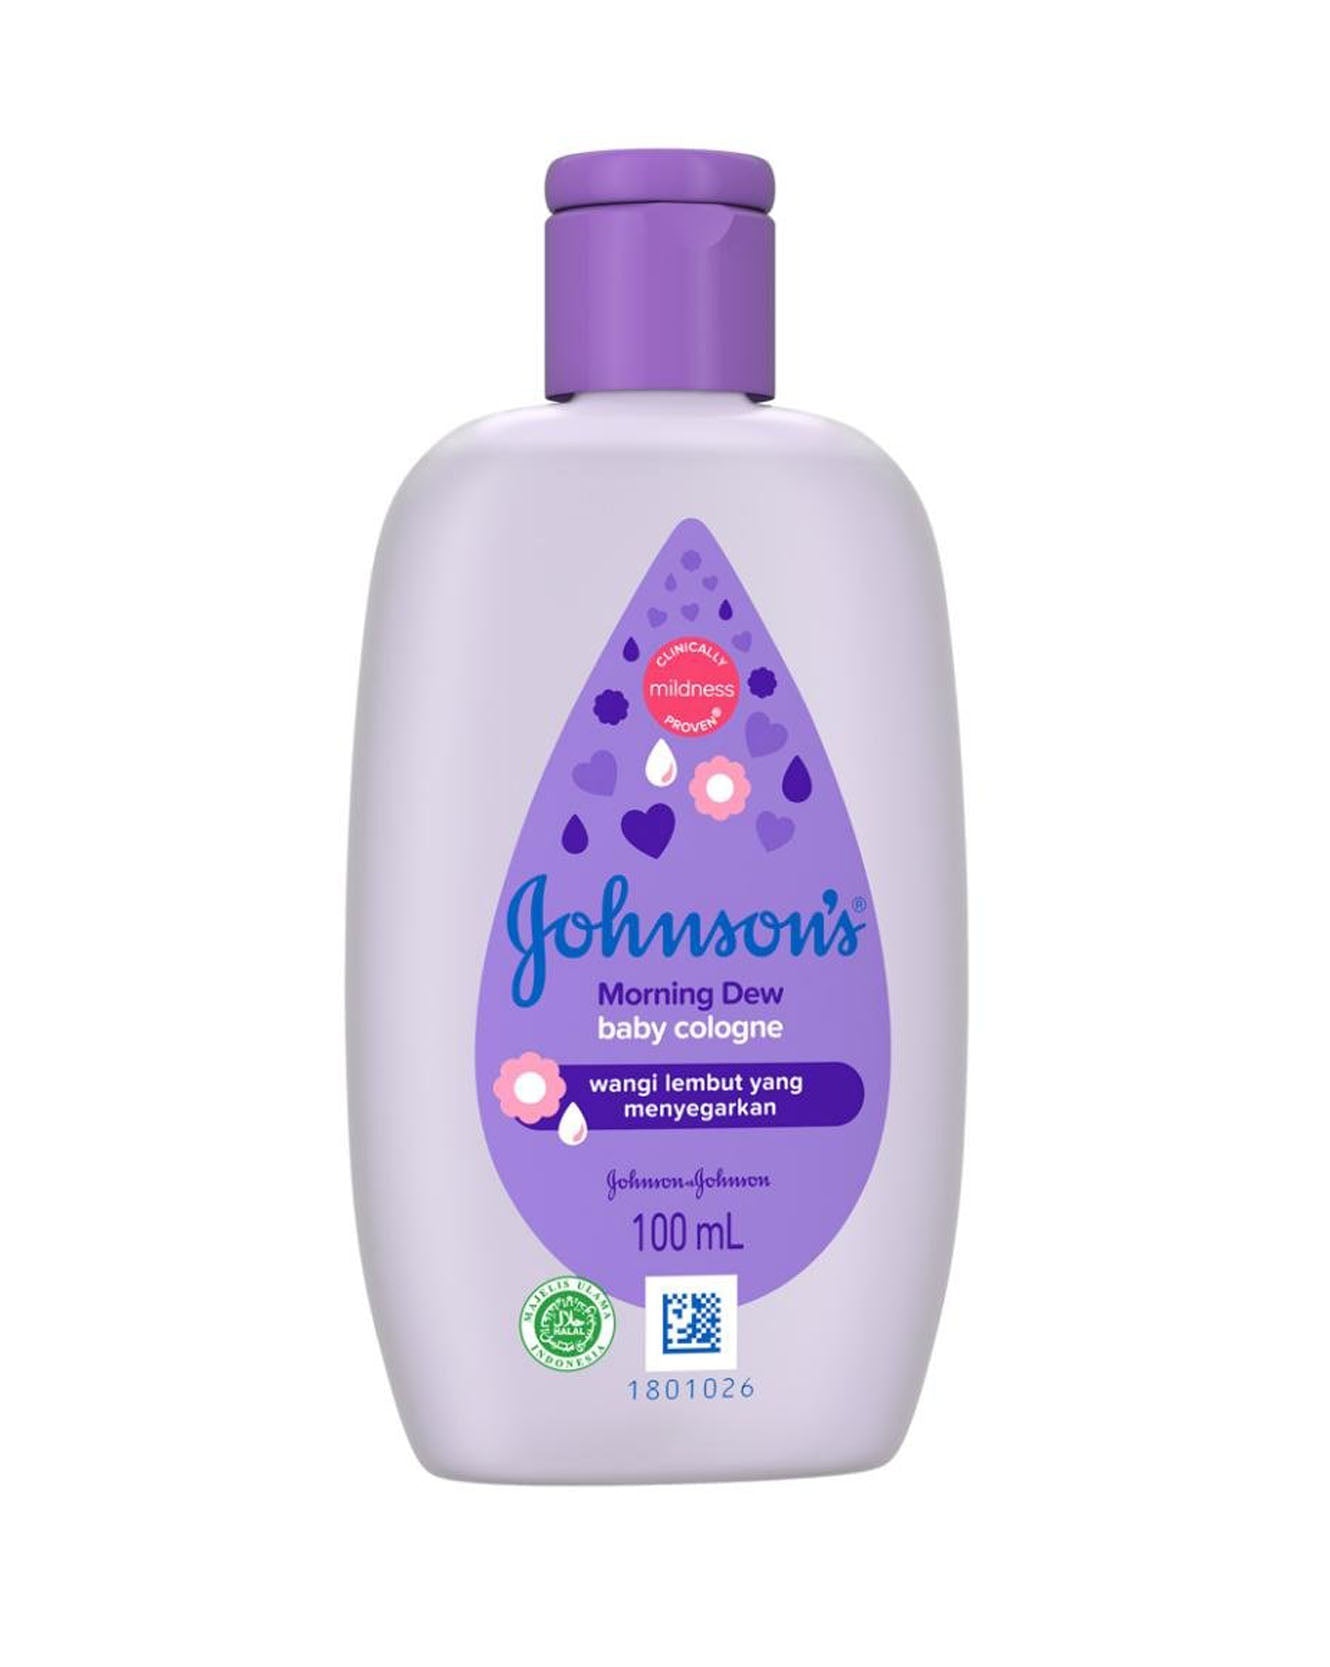 Johnsons Baby Cologne Morning Dew 100ml